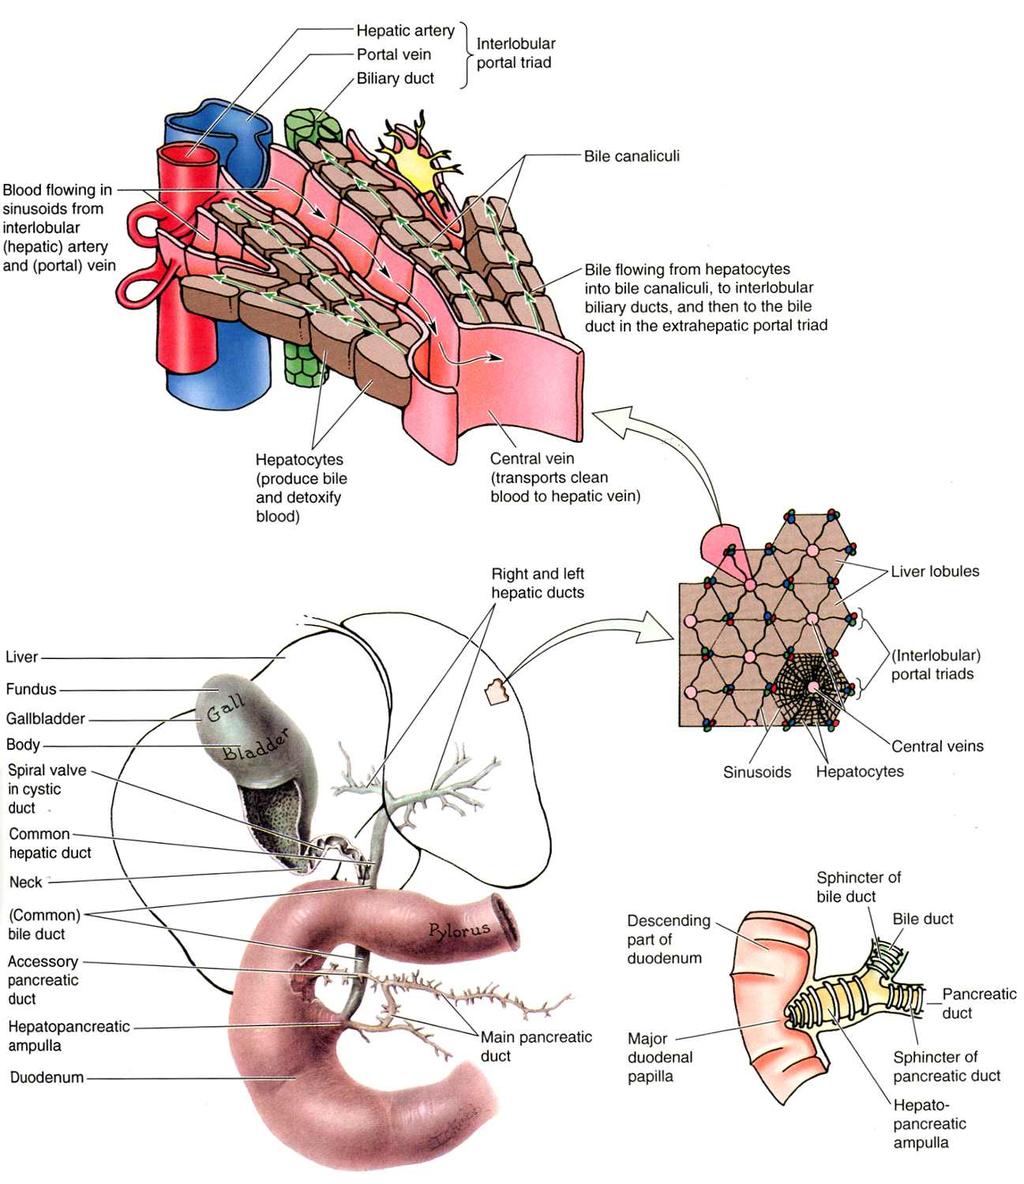 Anatomical Overview Liver lobule: bile from hepatocytes drains to scanaliculi, then to biliary ducts in portal triad Biliary ducts in triads drain to right & left hepatic ducts Common hepatic duct: